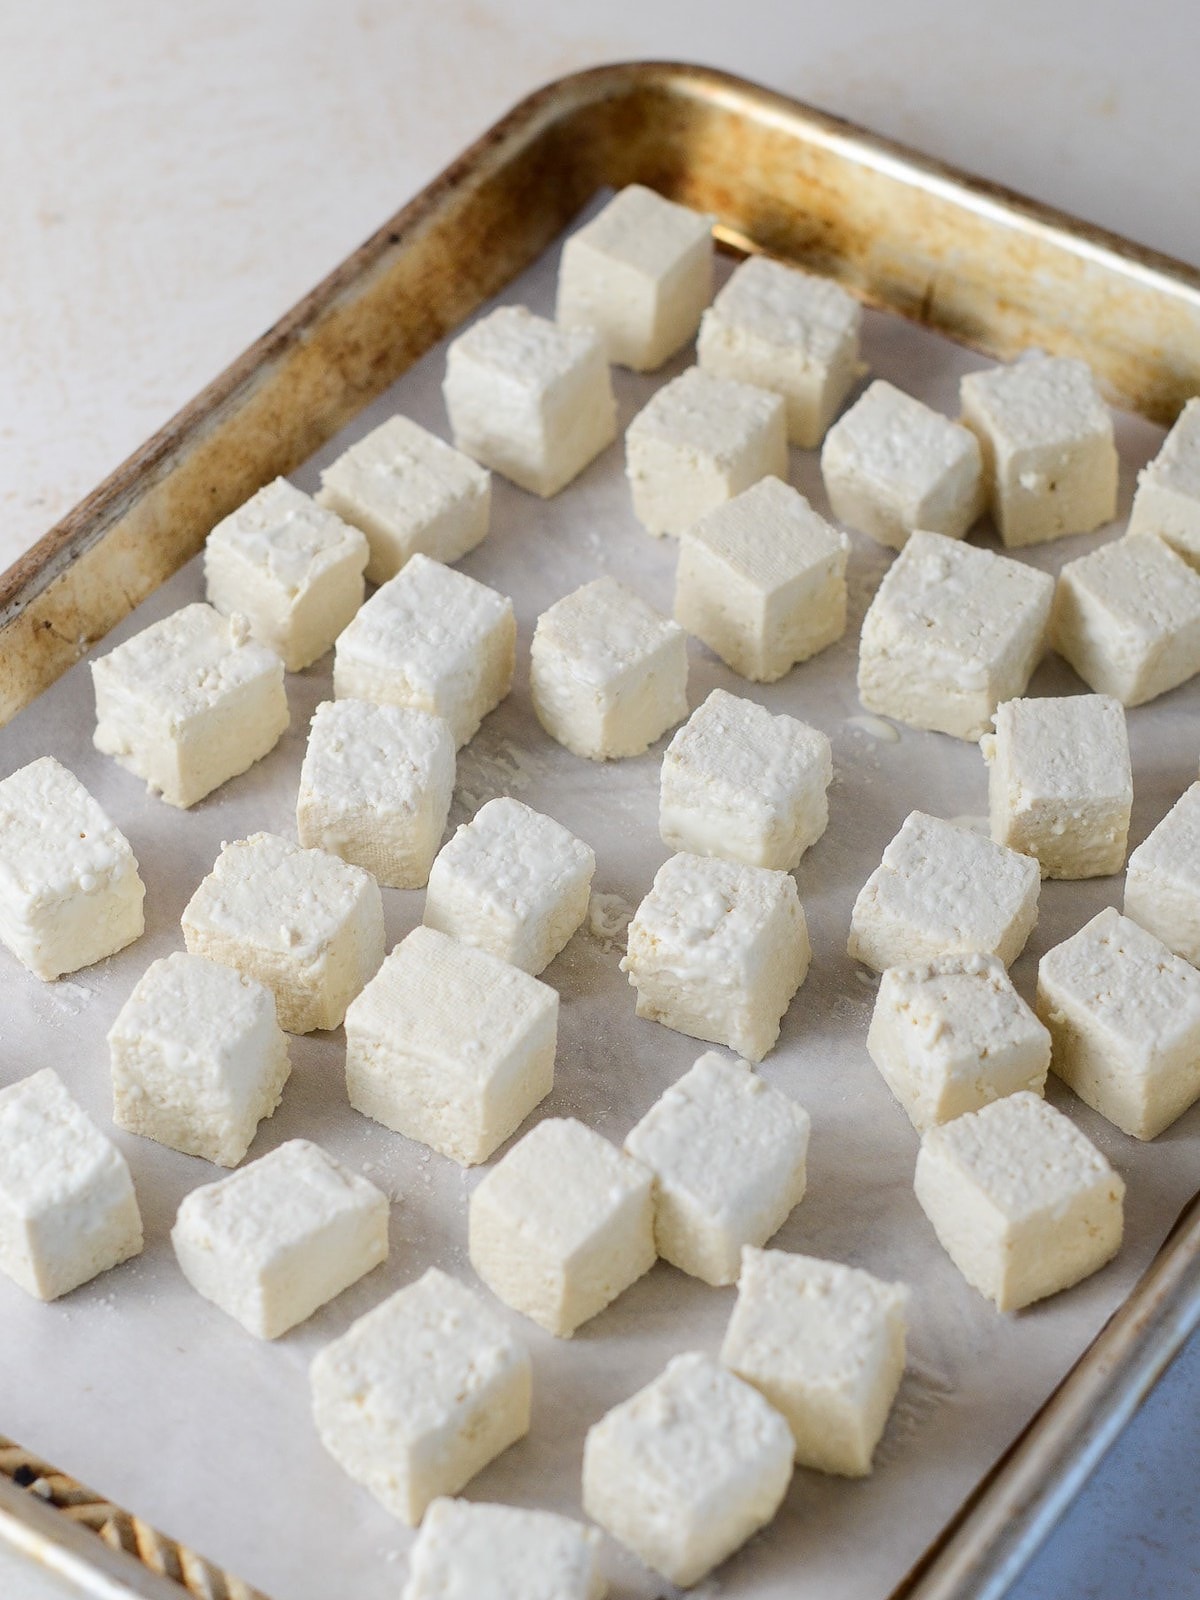 This is a photo of pre-cooked tofu cubes.